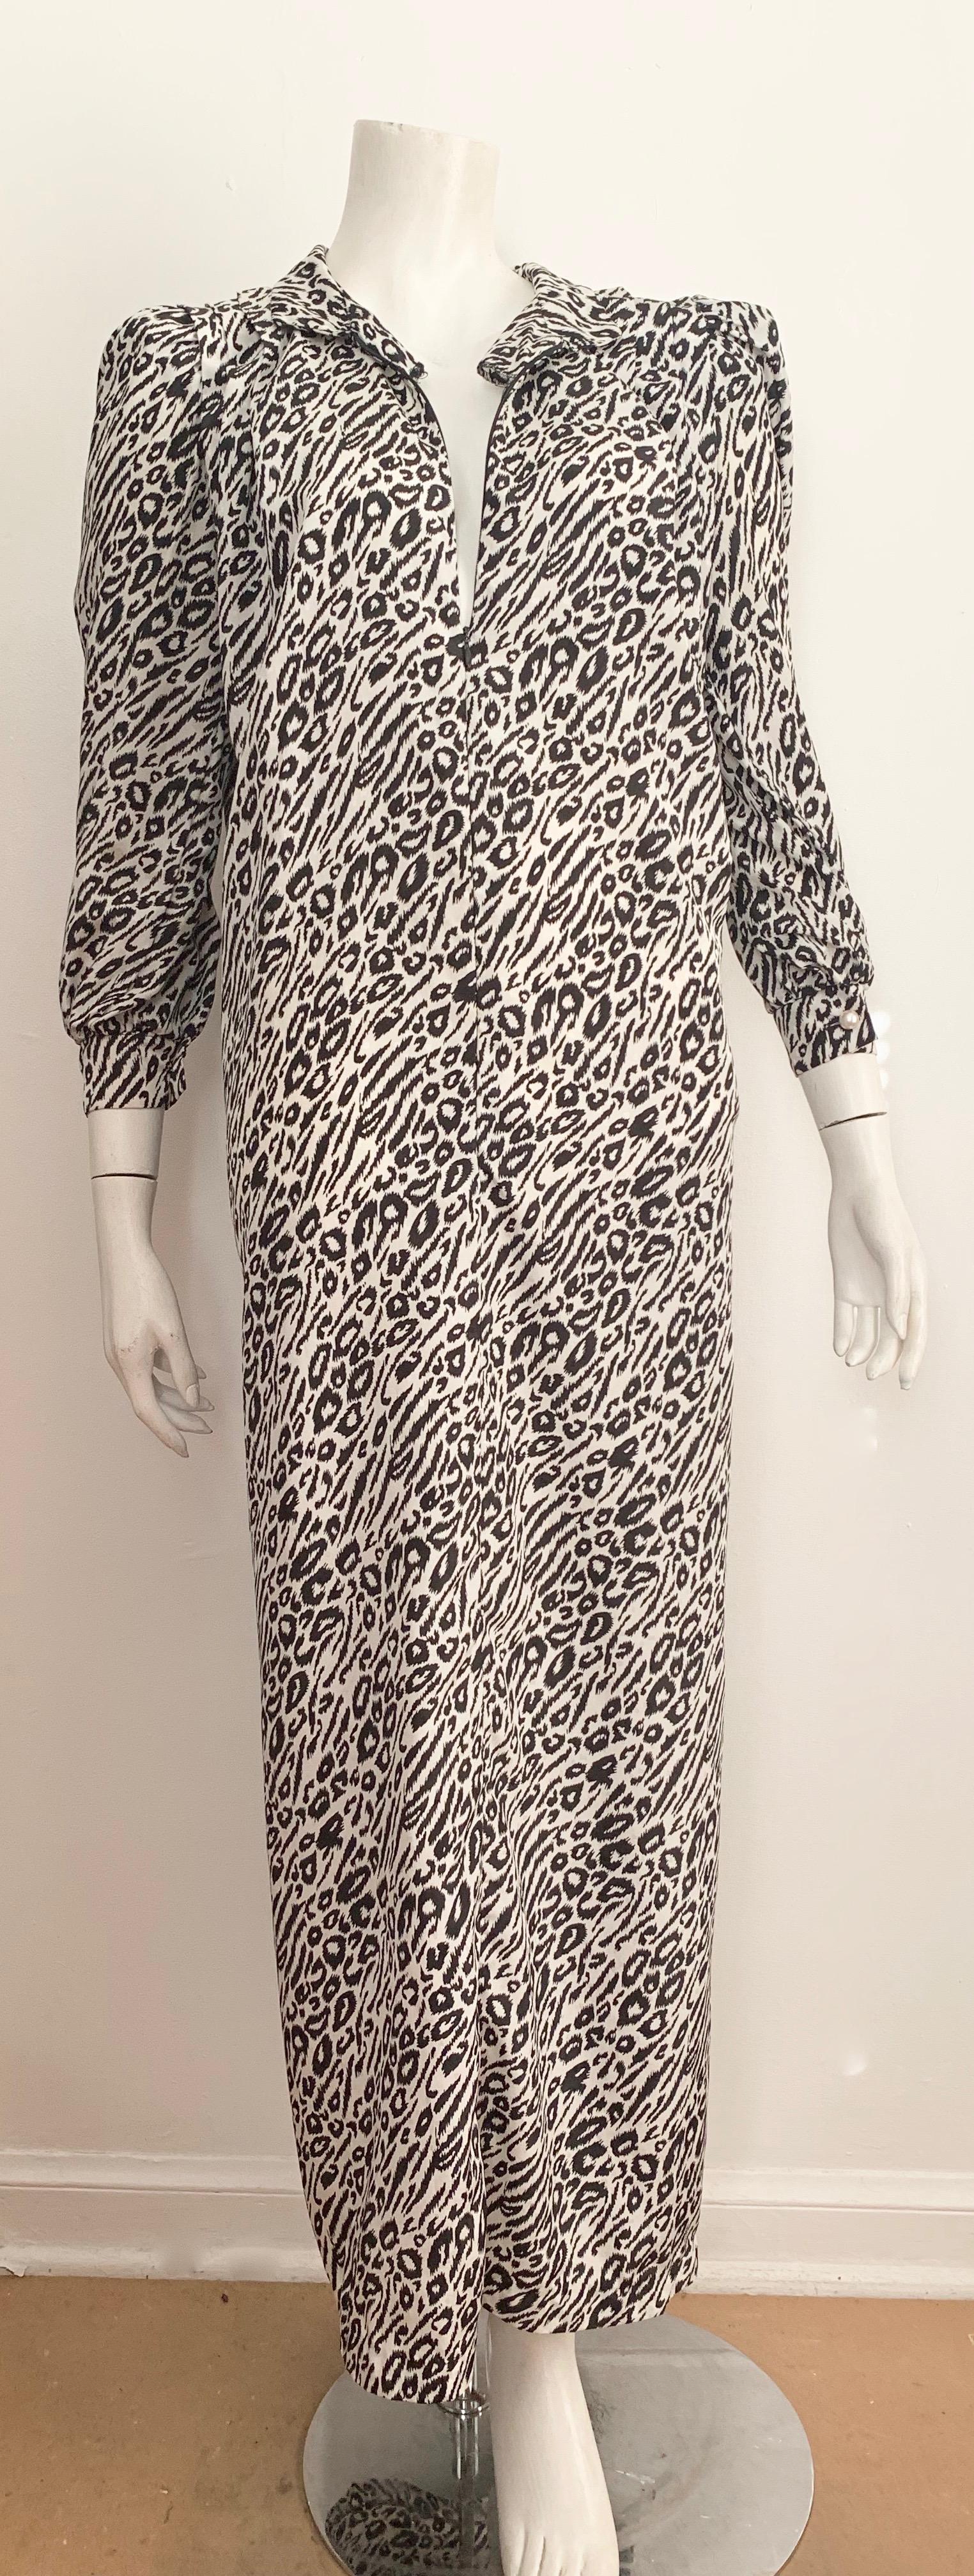 David Brown for Saks Fifth Avenue 1980s Caftan Loungewear Size Fits All. 11